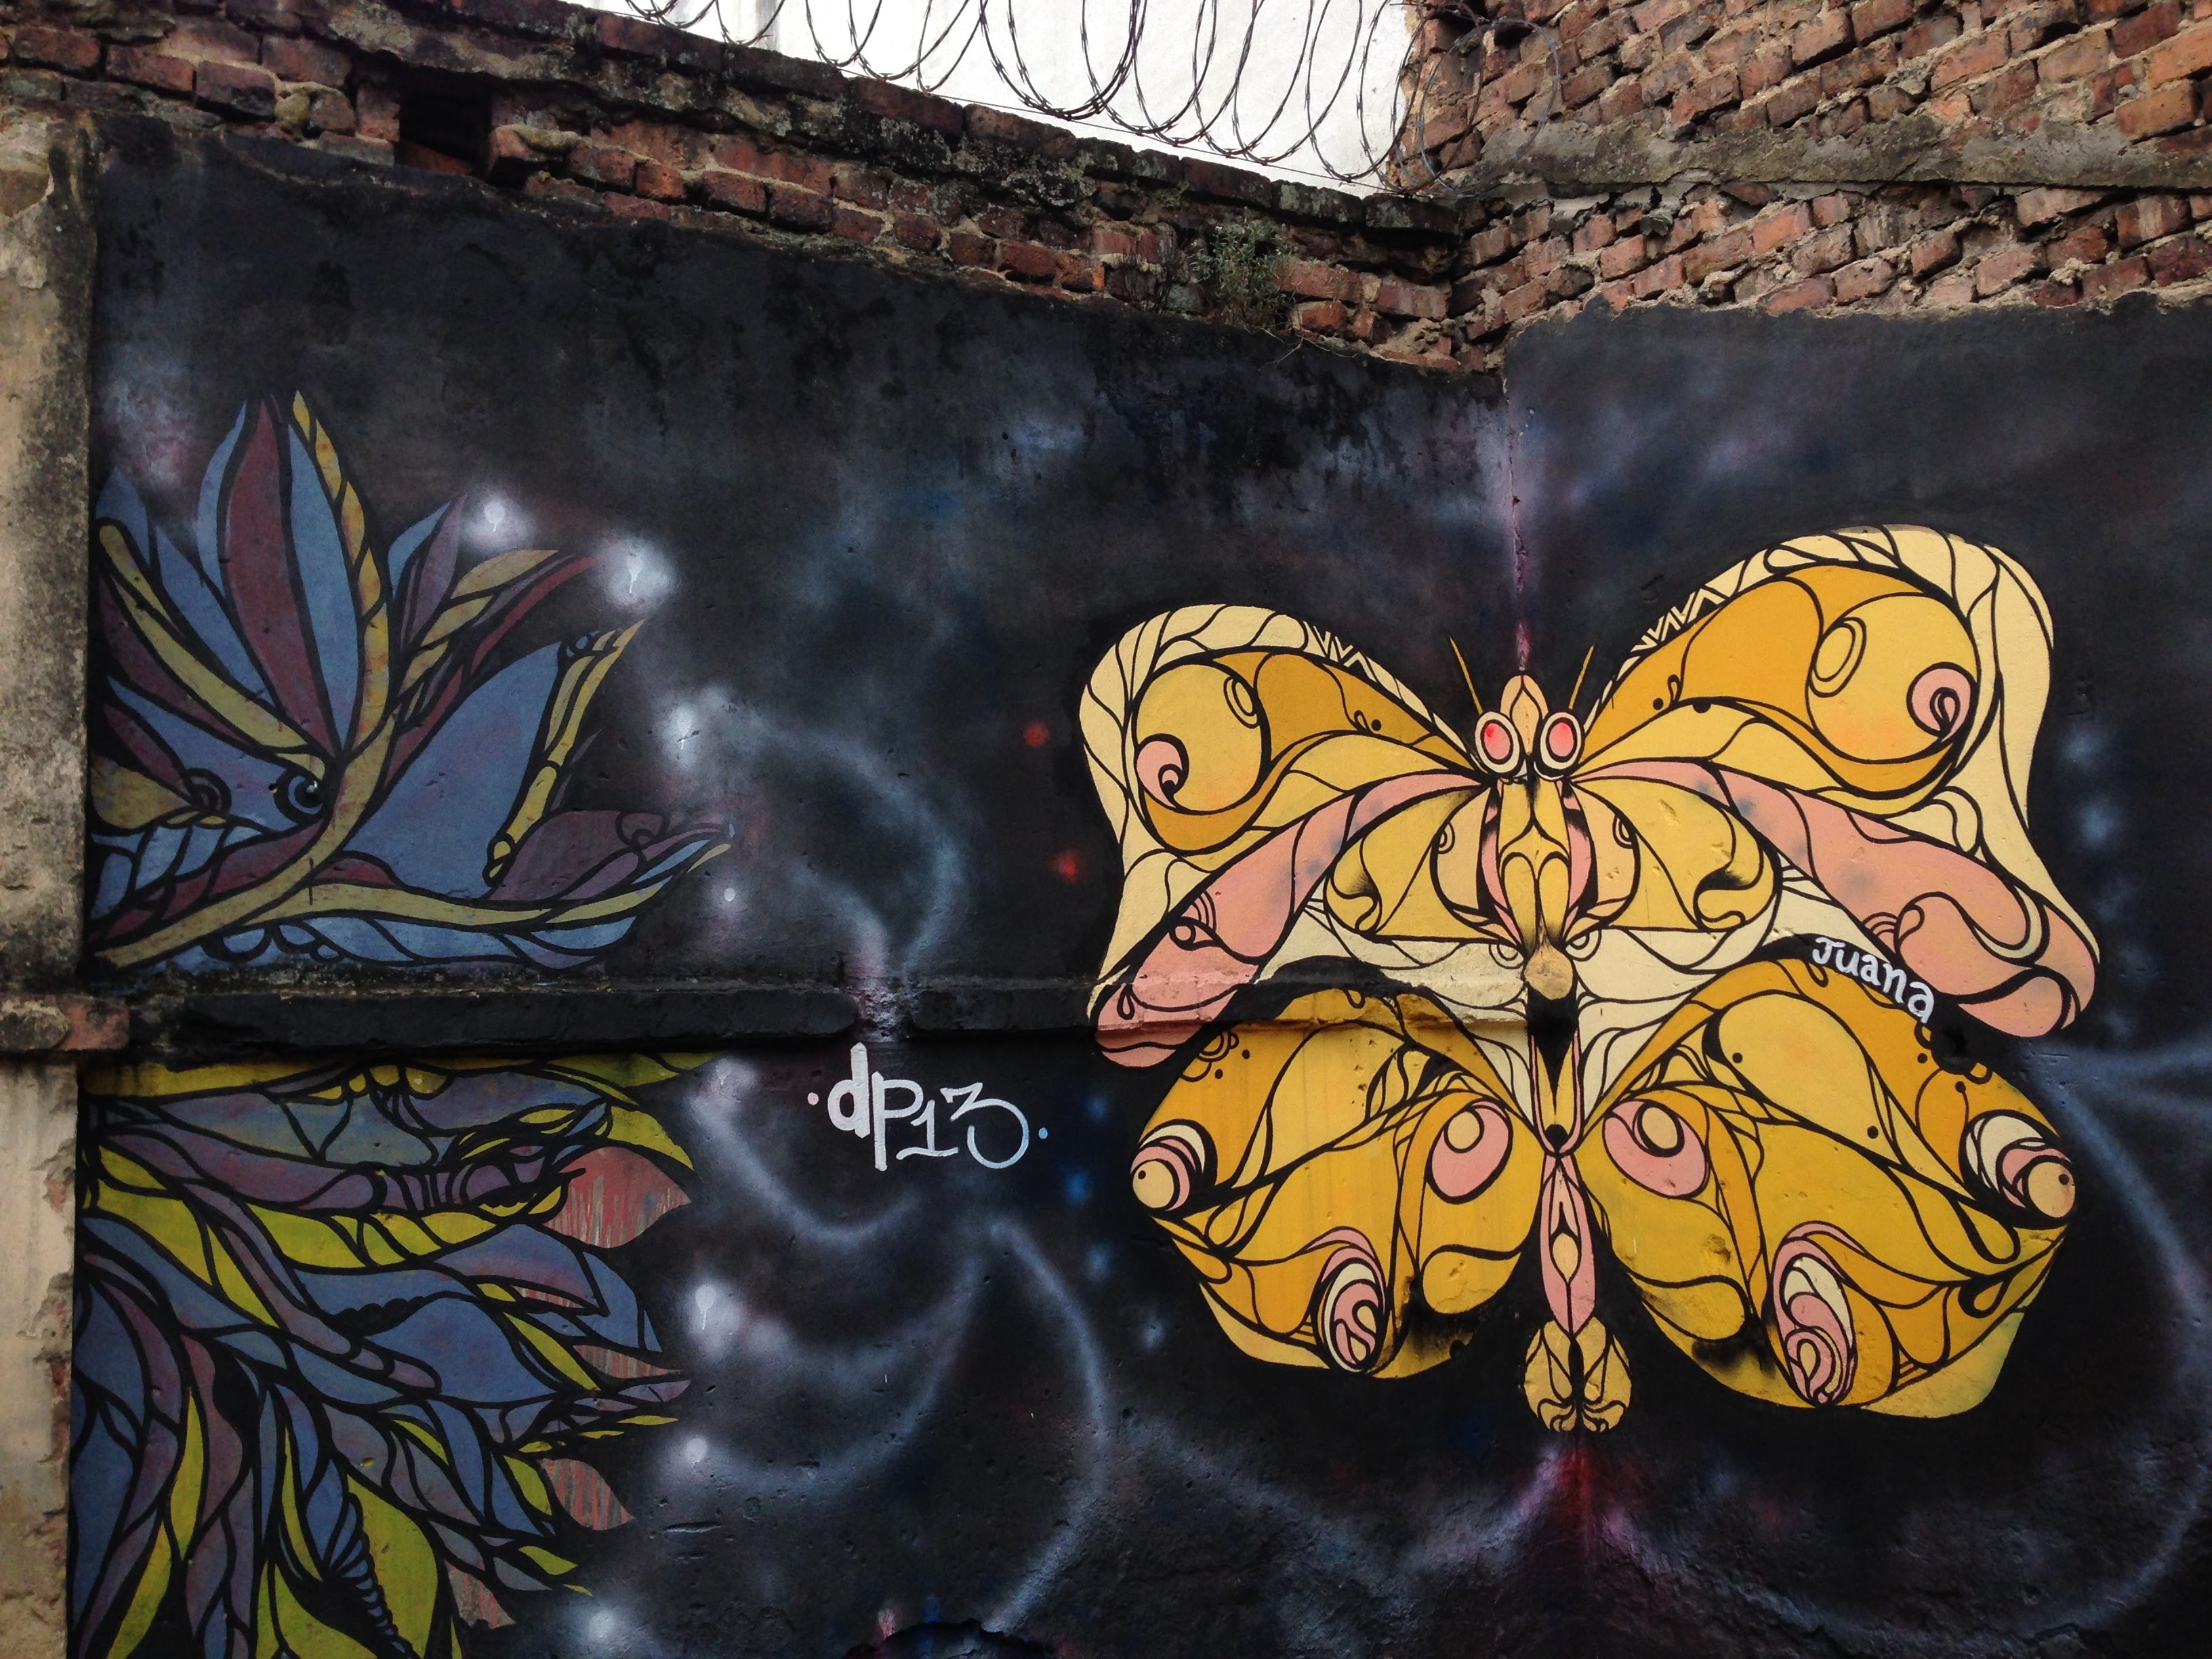 A mural image of a yellow butterfly painted on a wall.